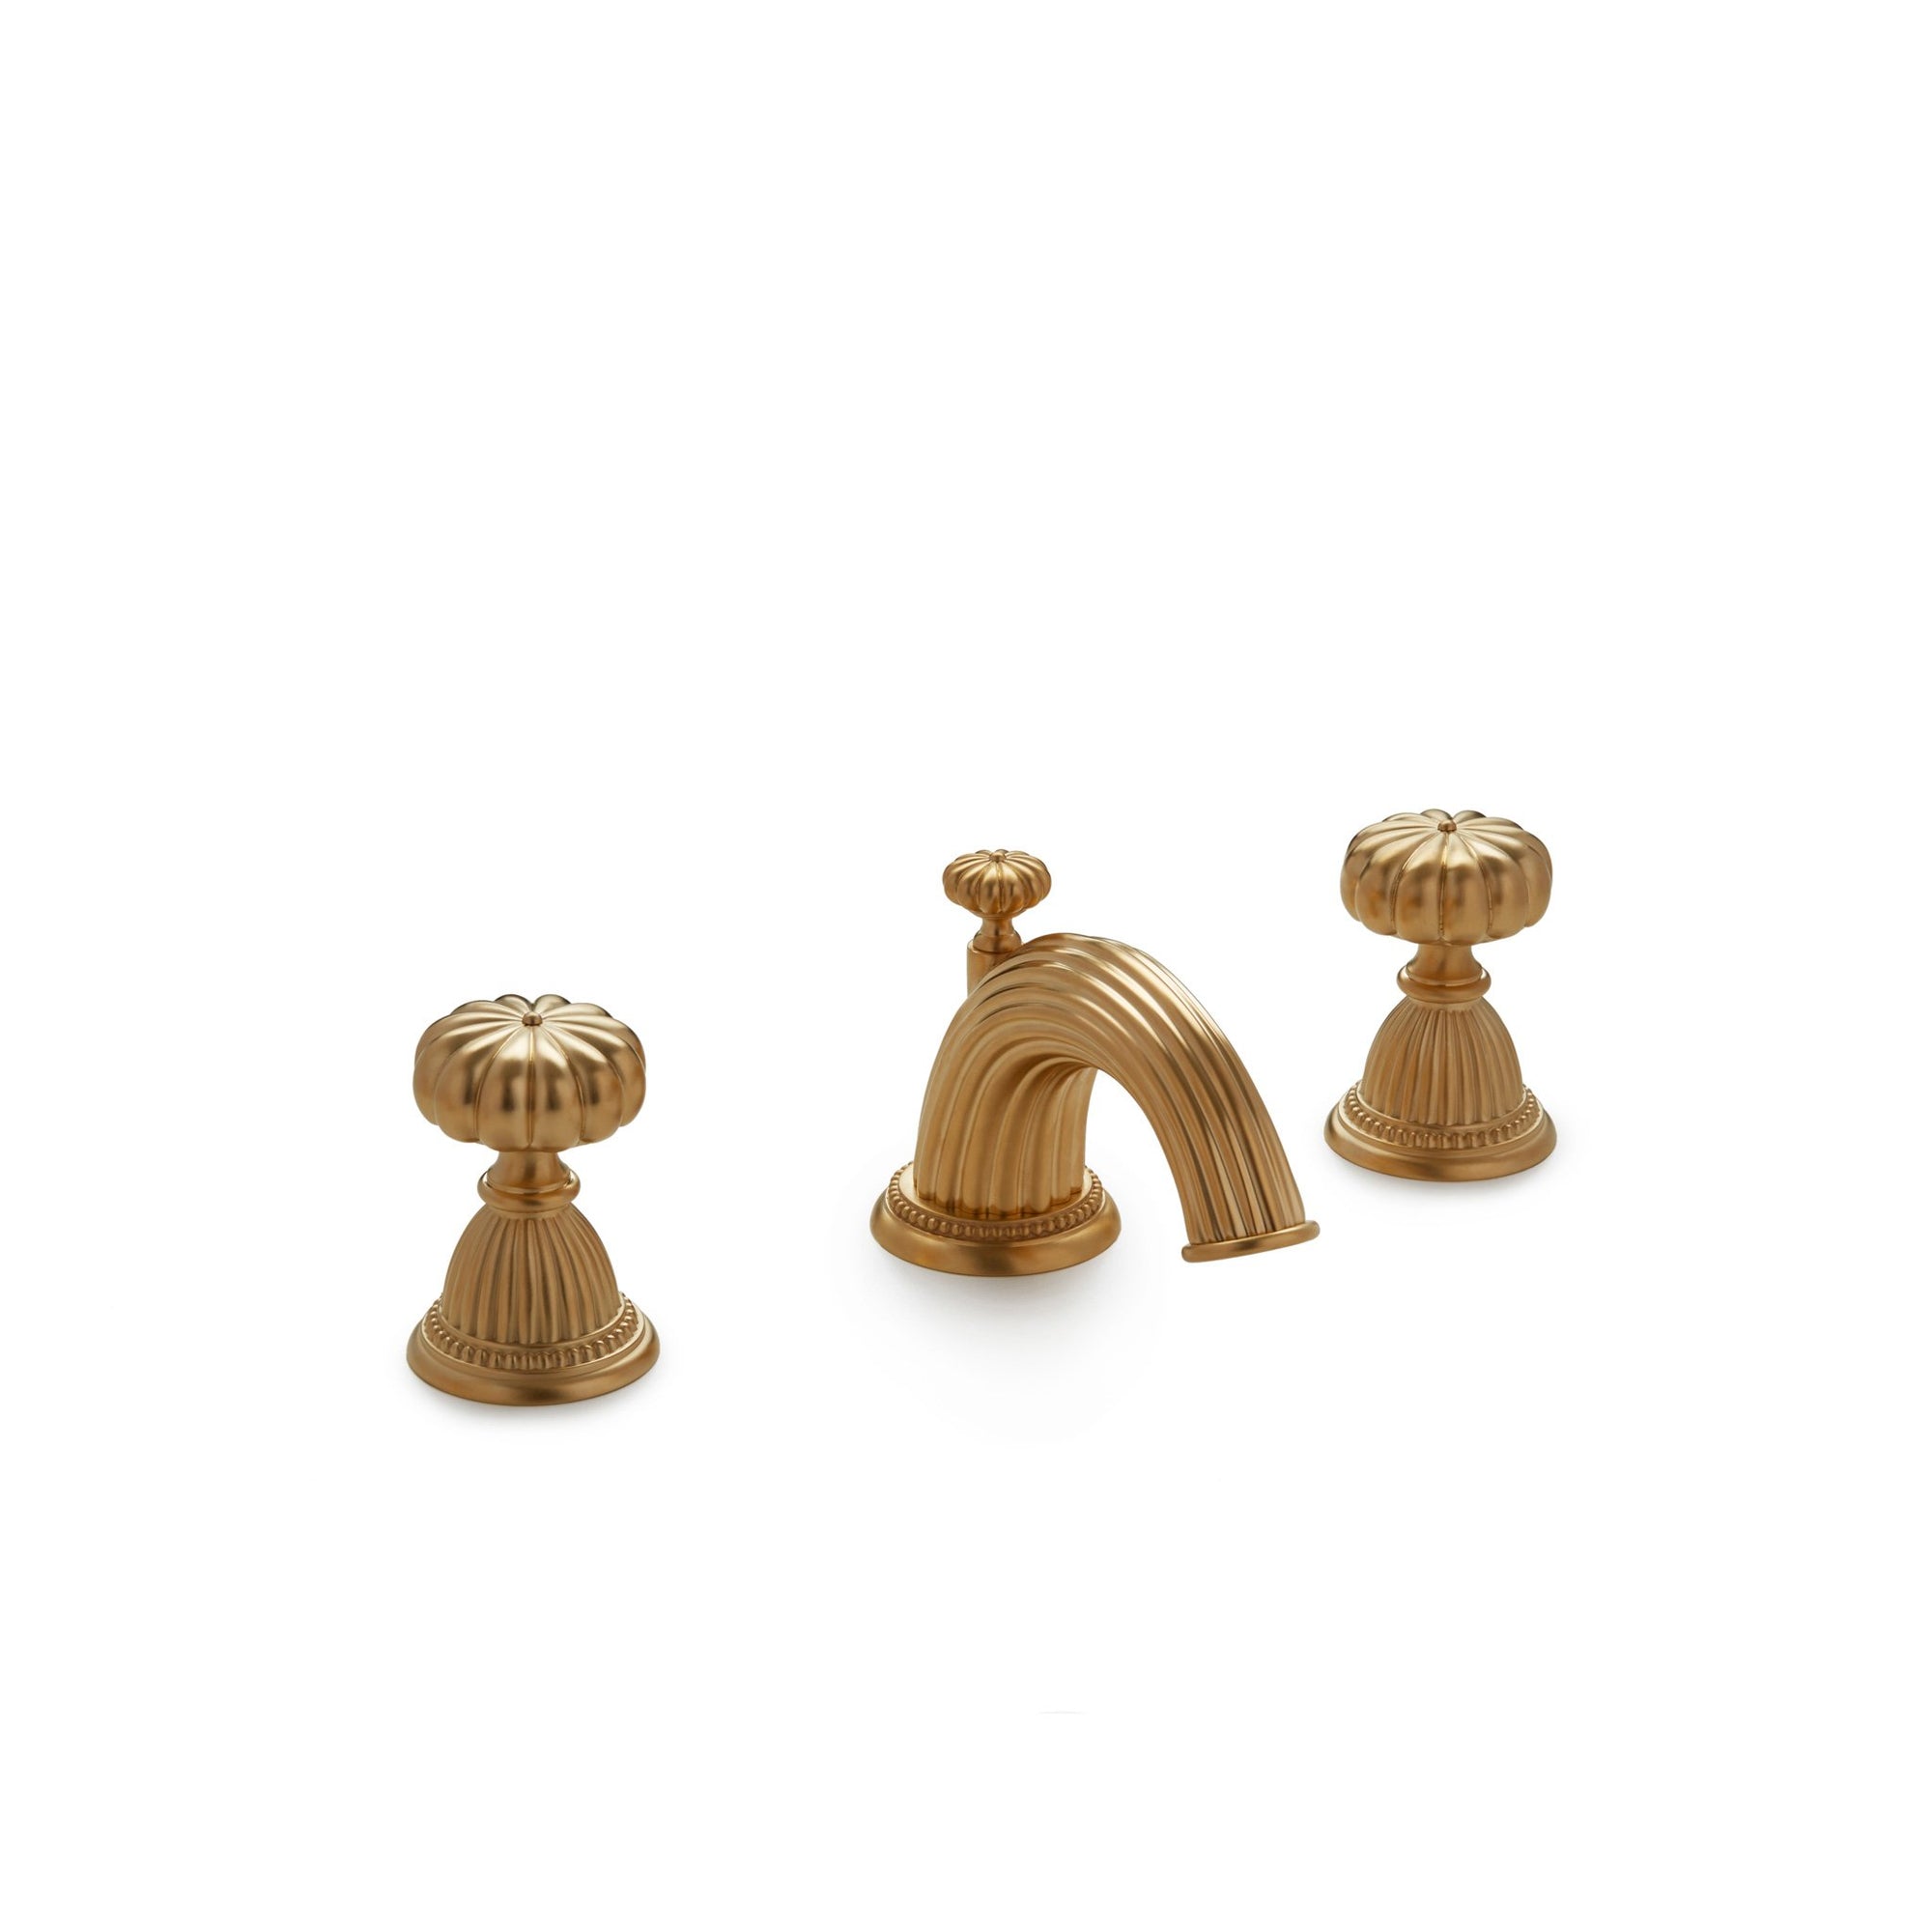 0910BSN-GP Sherle Wagner International Melon Smooth Knob Faucet Set in Gold Plate metal finish